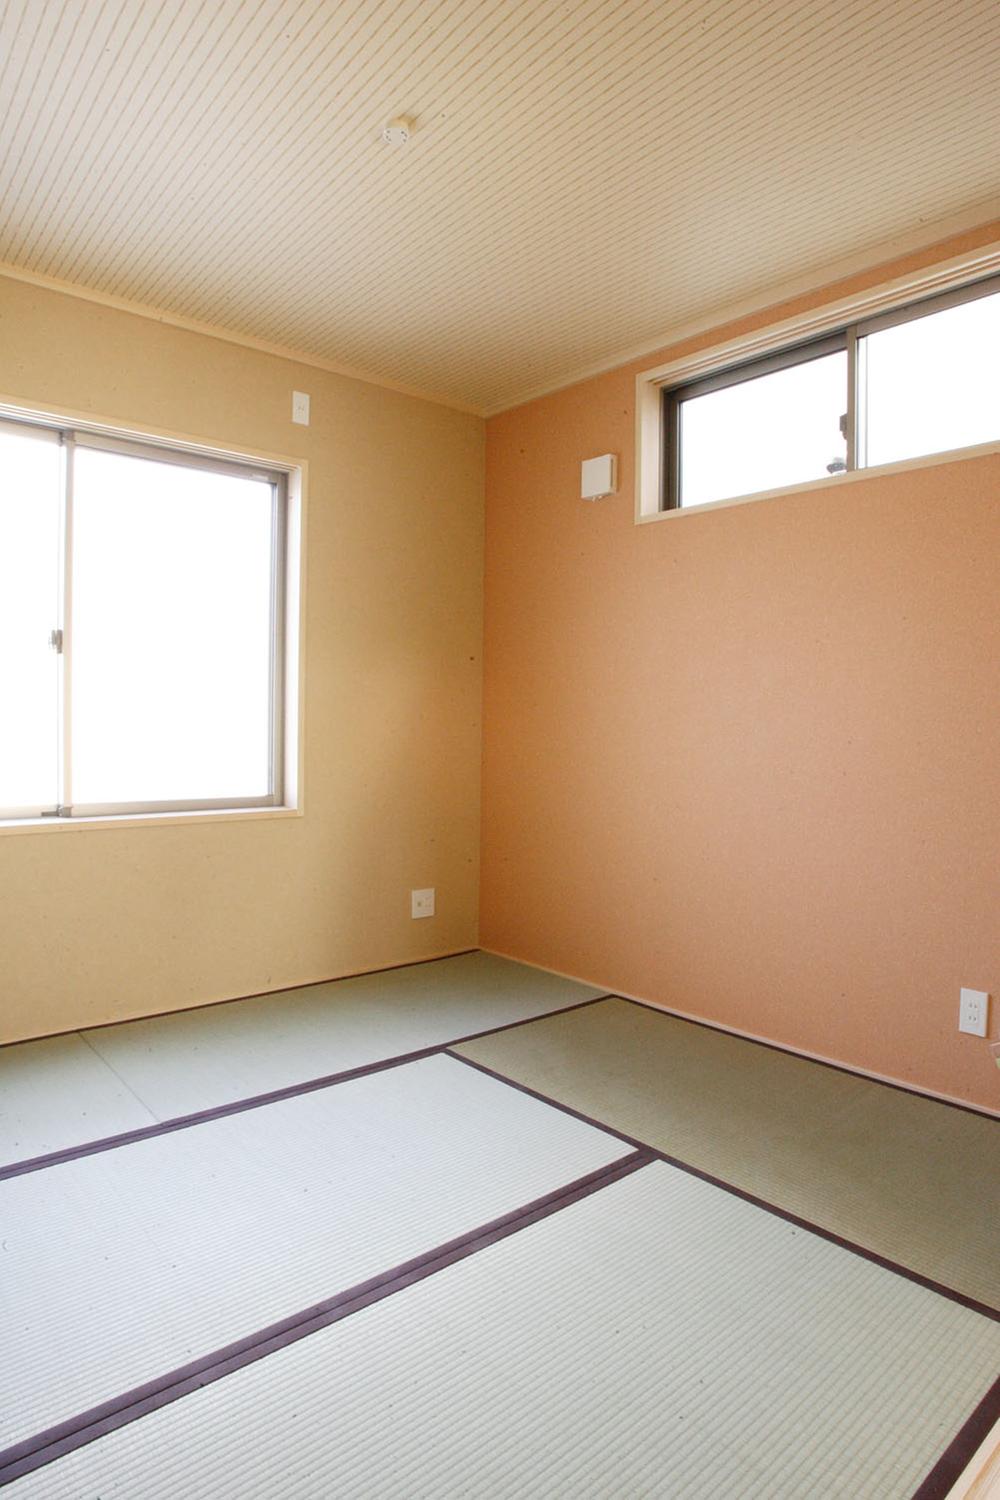 Building plan example (introspection photo). You spend leisurely time in the Japanese-style room where the bright light poured ^^